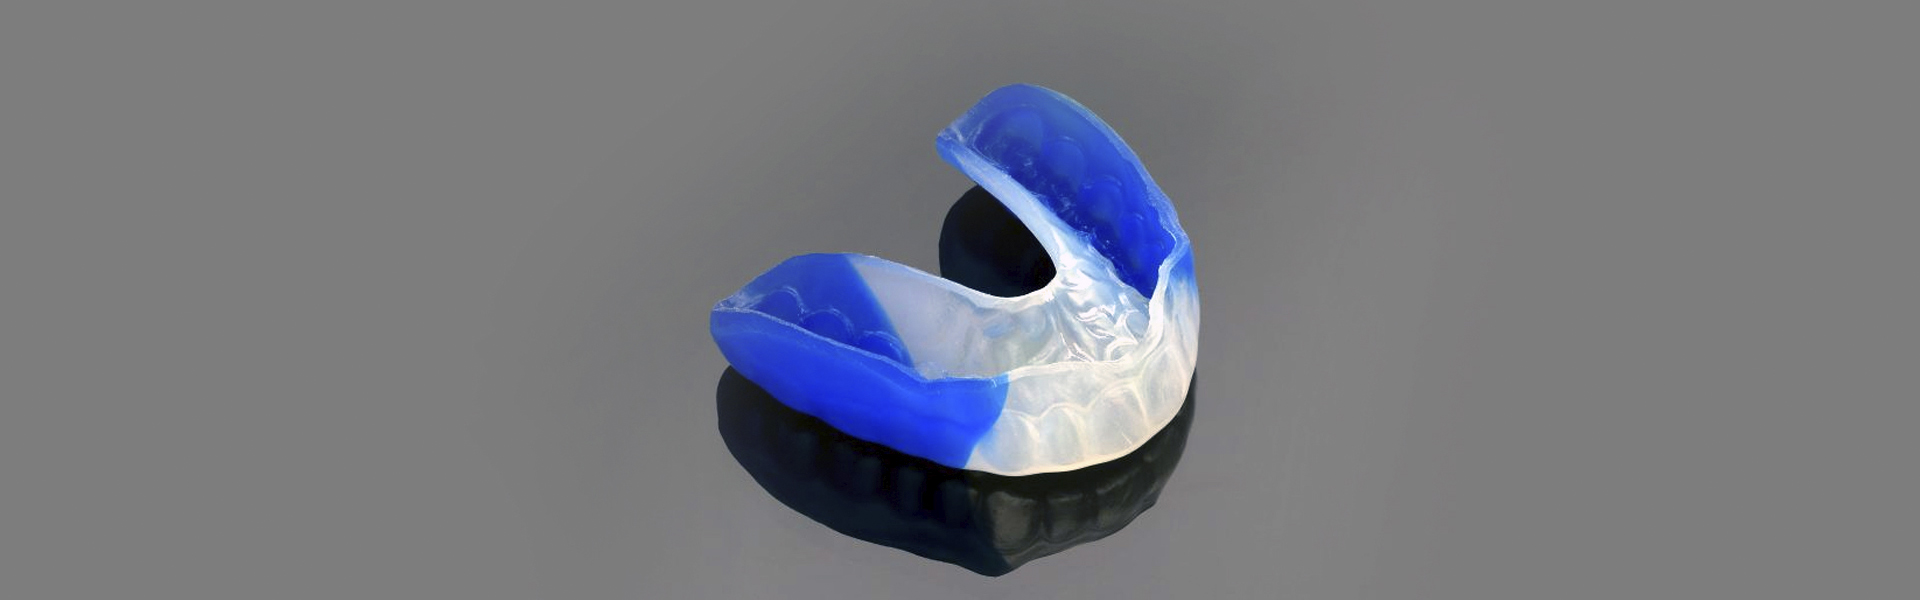 Importance of Mouthguards in Dentistry